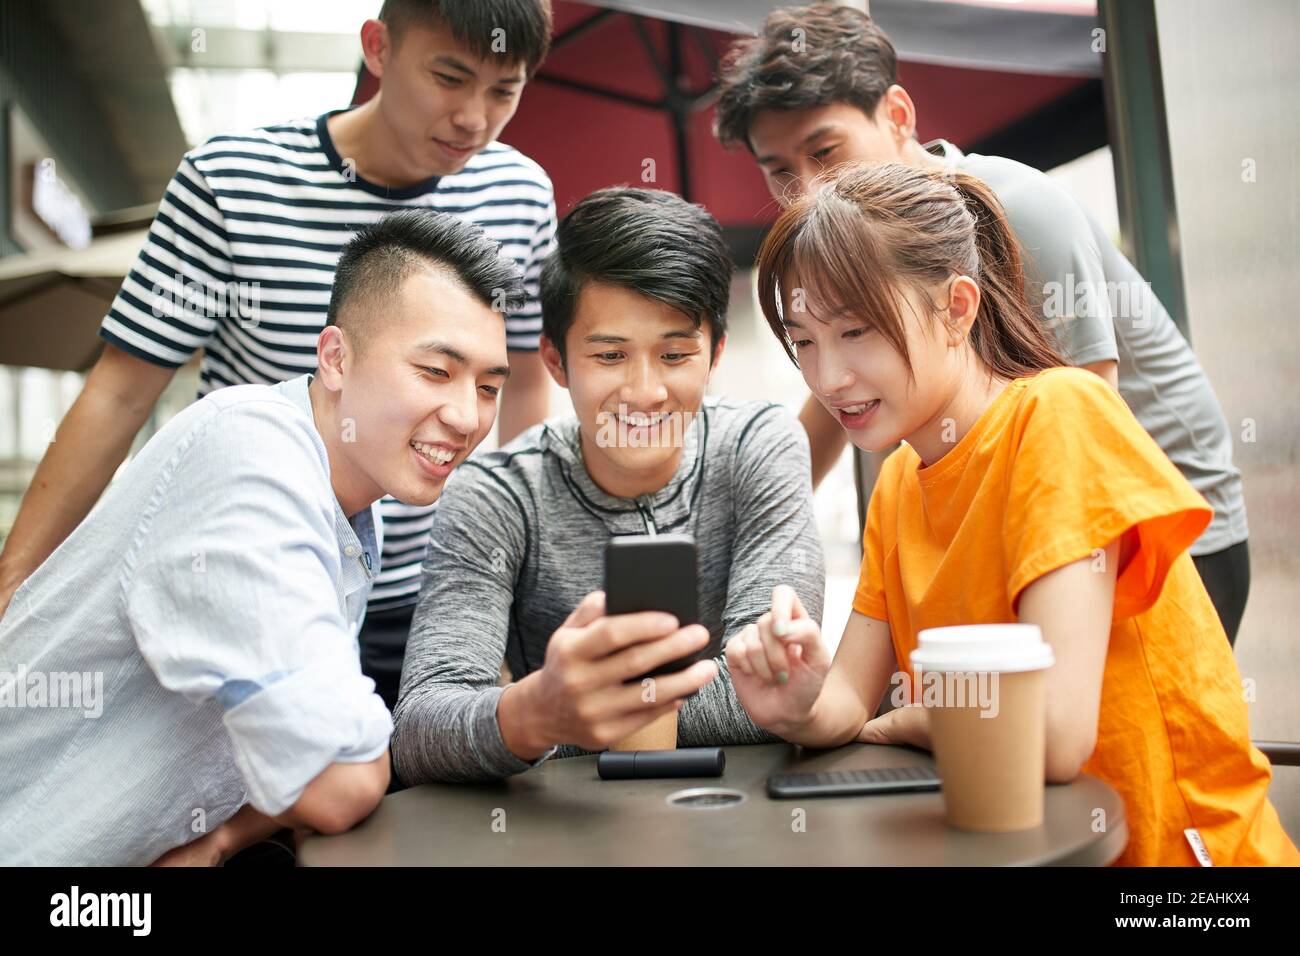 group of young asian adults four men and and a woman looking at mobile phone together outdoors Stock Photo